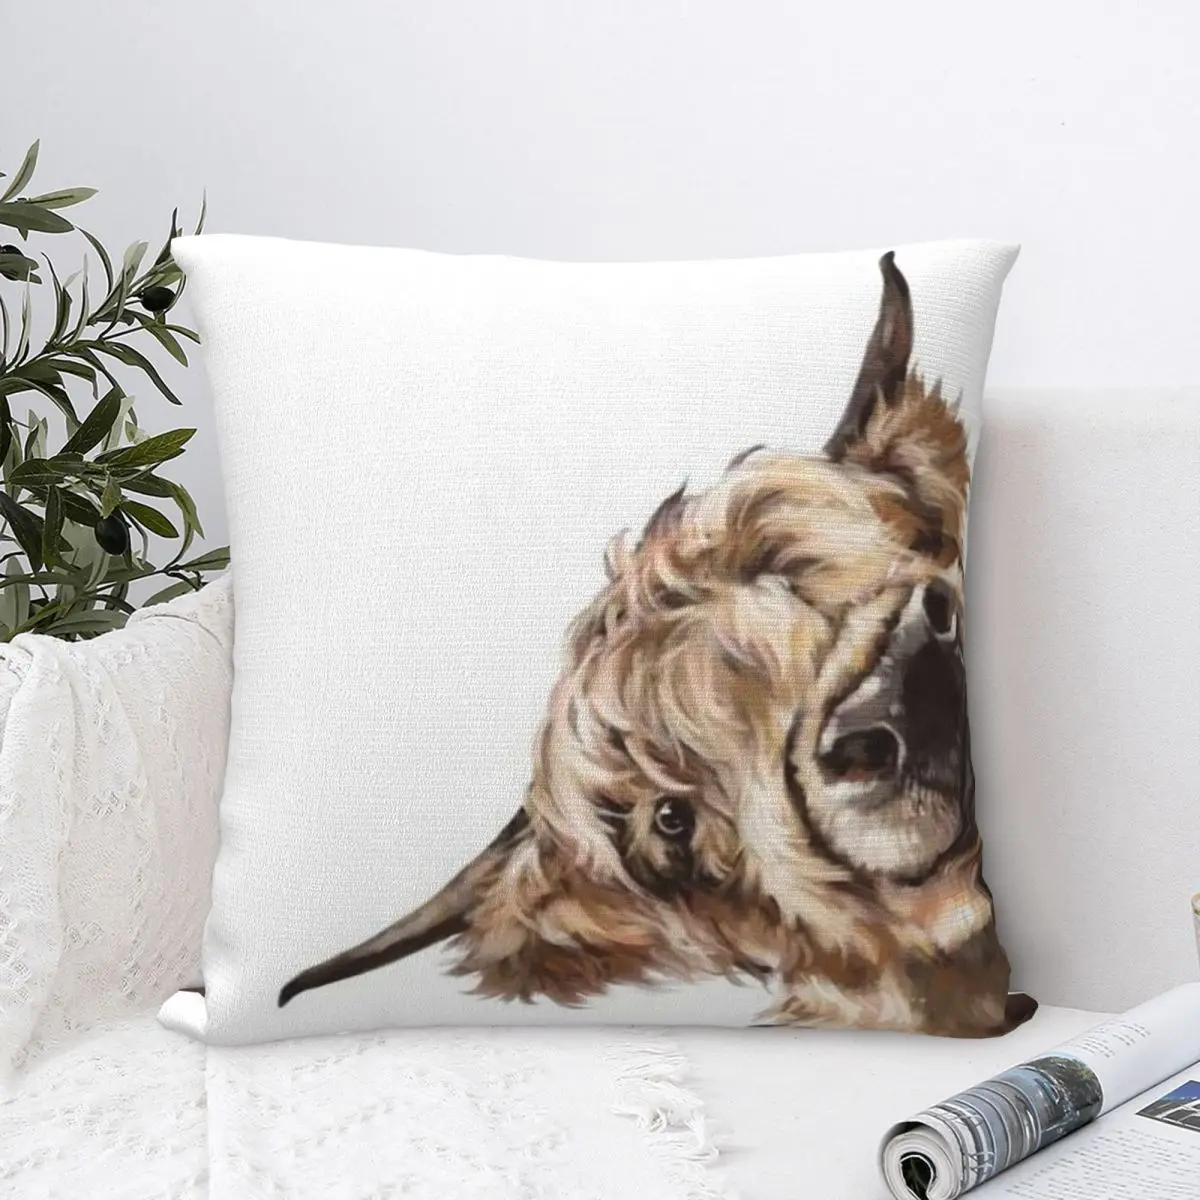 Highland Cow Animal Plaid Pillowcase Soft Polyester Cushion Cover Decorations Throw Pillow Case Cover Home Drop Shipping 40*40cm images - 6